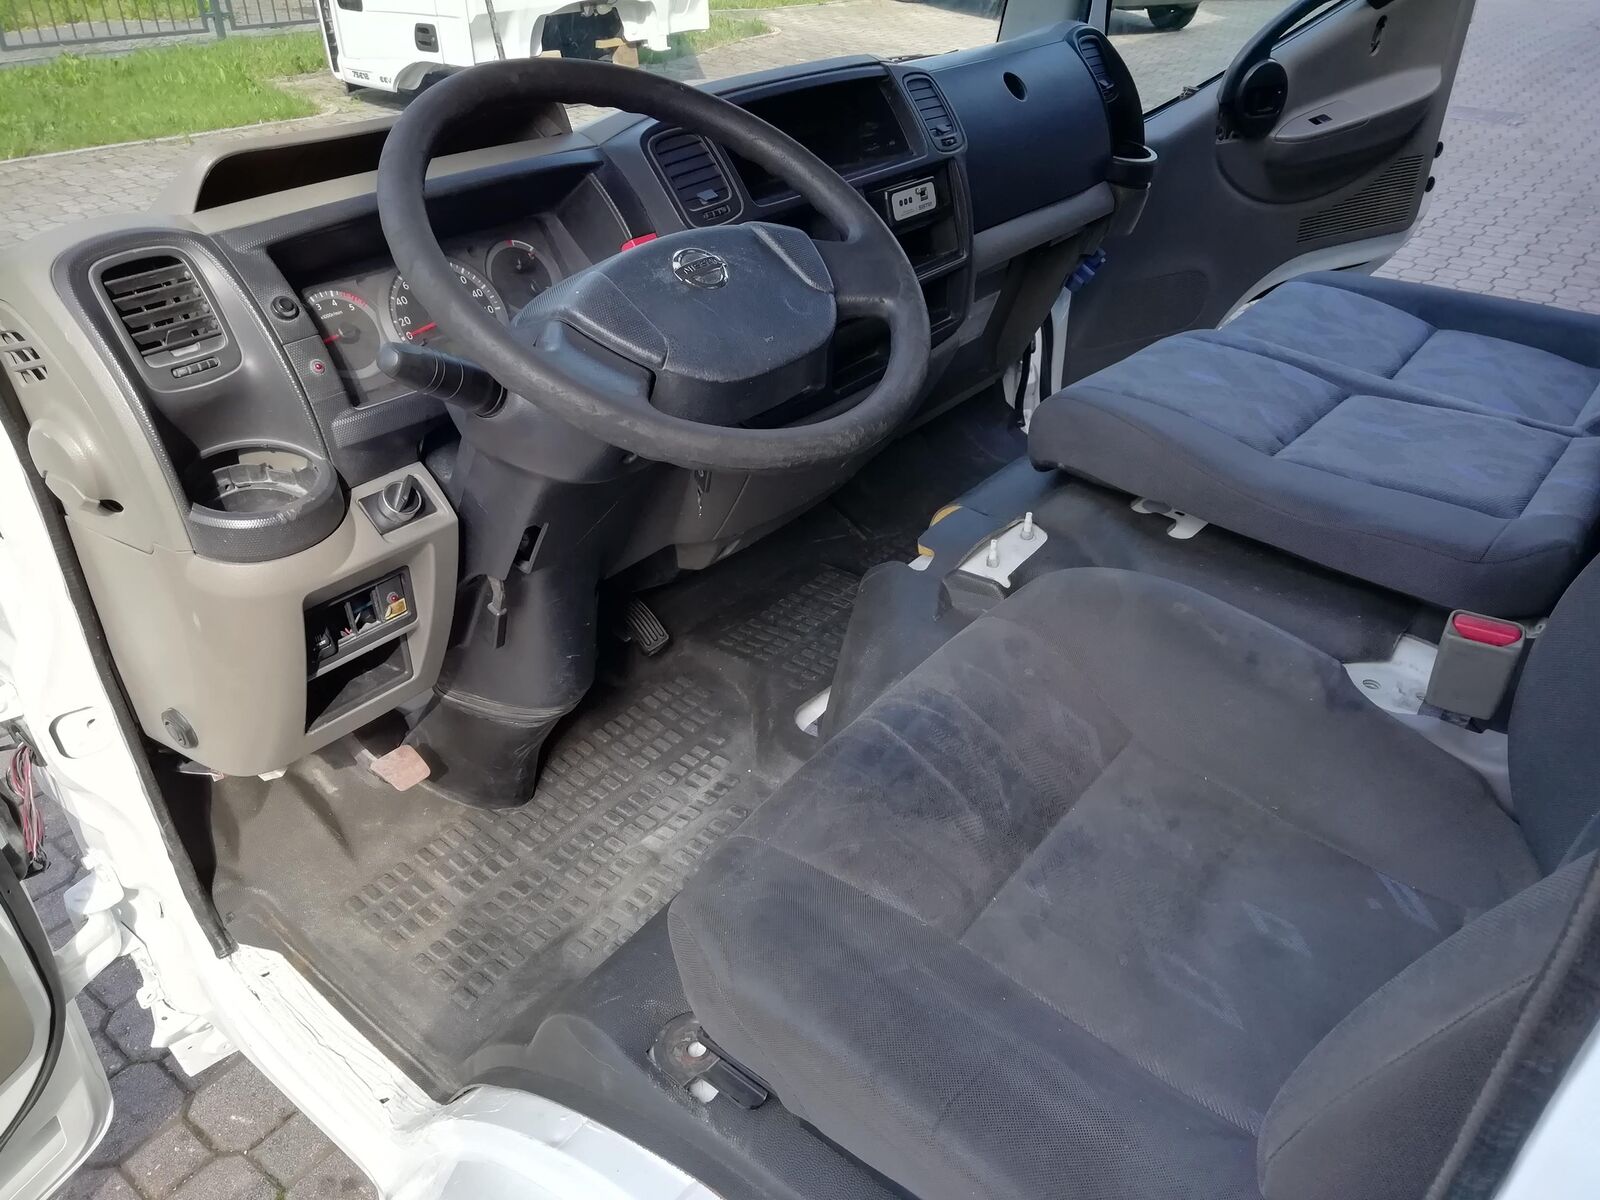 cabina NISSAN NT400 per camion NISSAN NT400